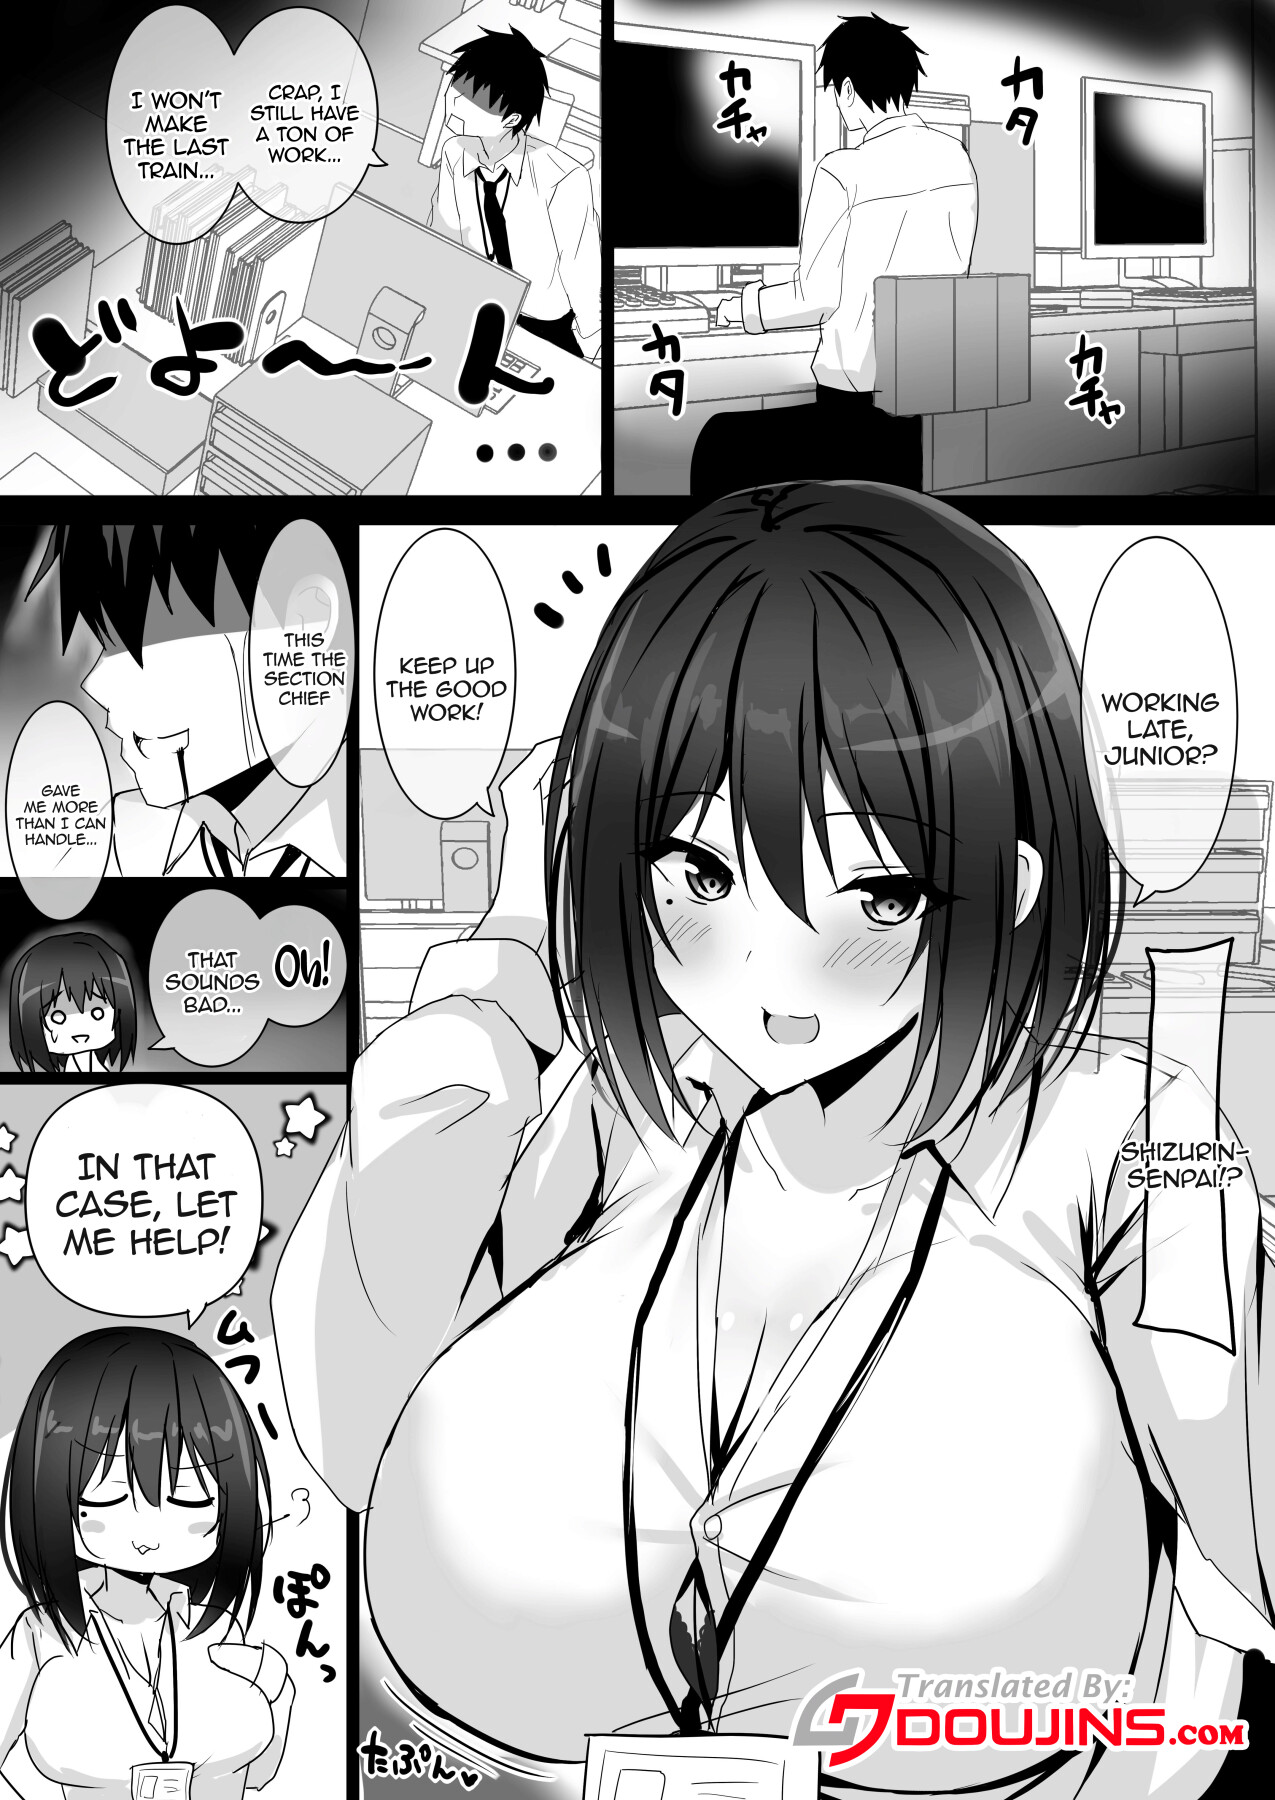 Hentai Manga Comic-The Story About Being Taken Back Home By The Huge-Tittied Higher-Up That I Admired-Read-2